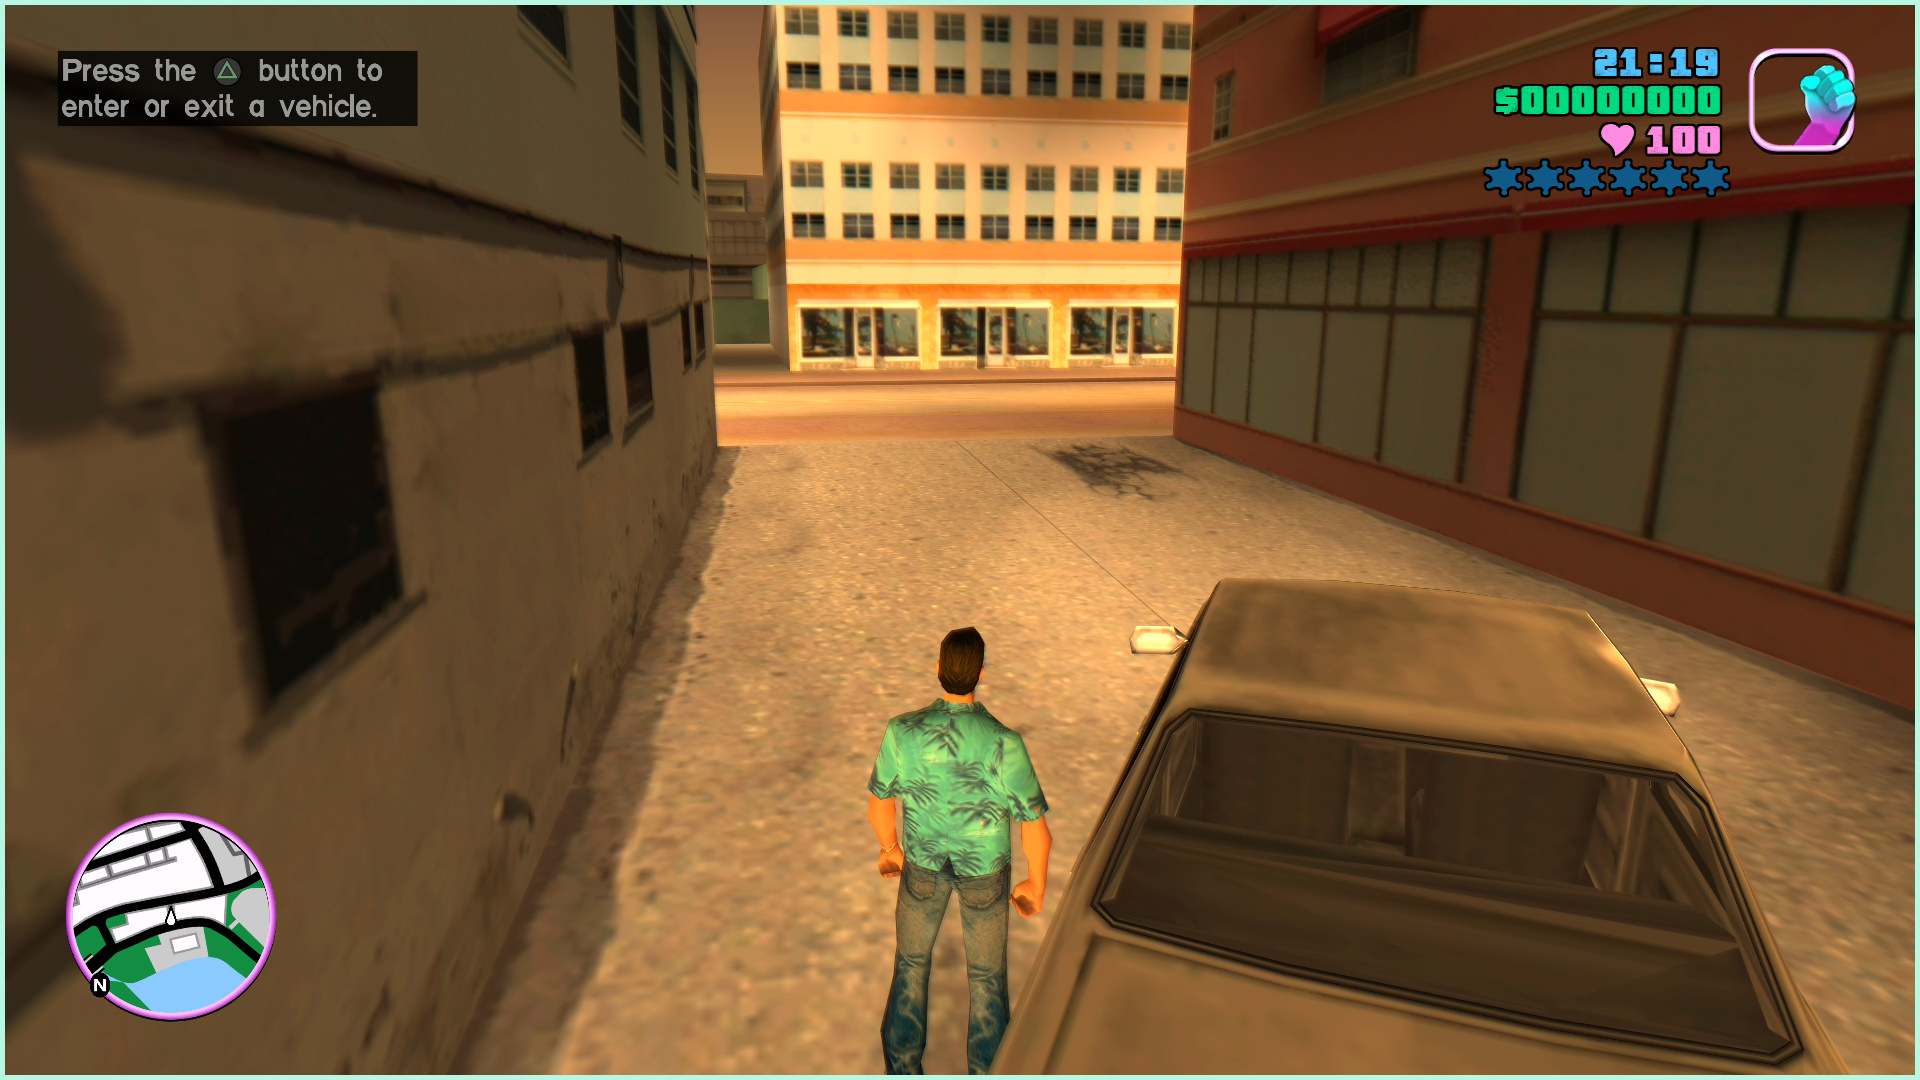 Gta vice city game free download for pc highly compressed